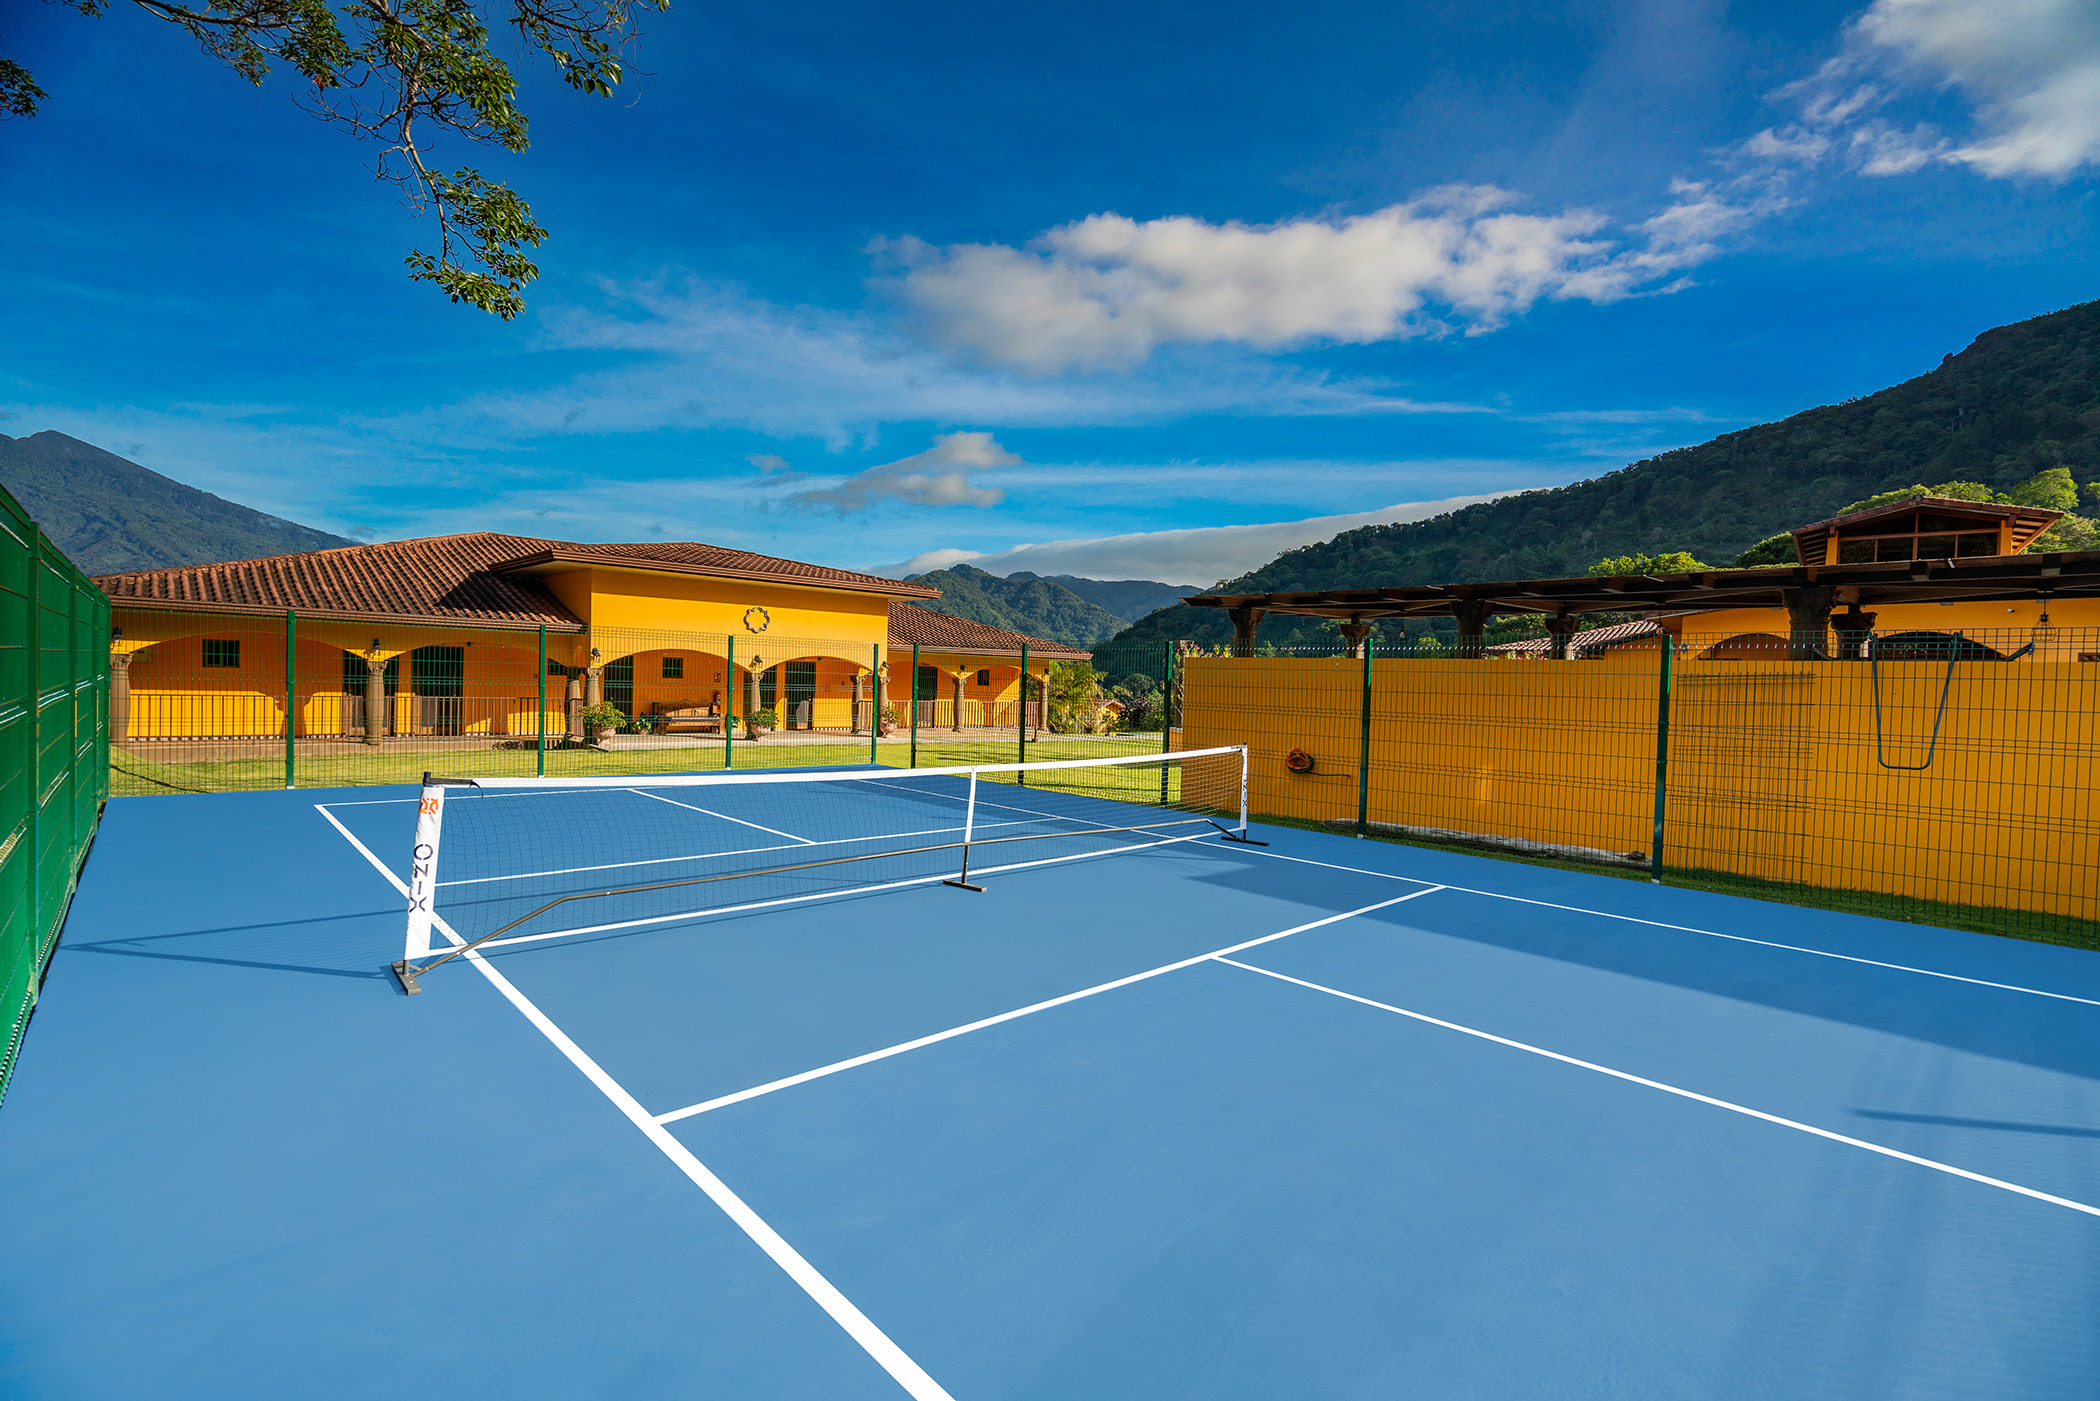 This Panama resort is the latest to jump on the pickleball craze